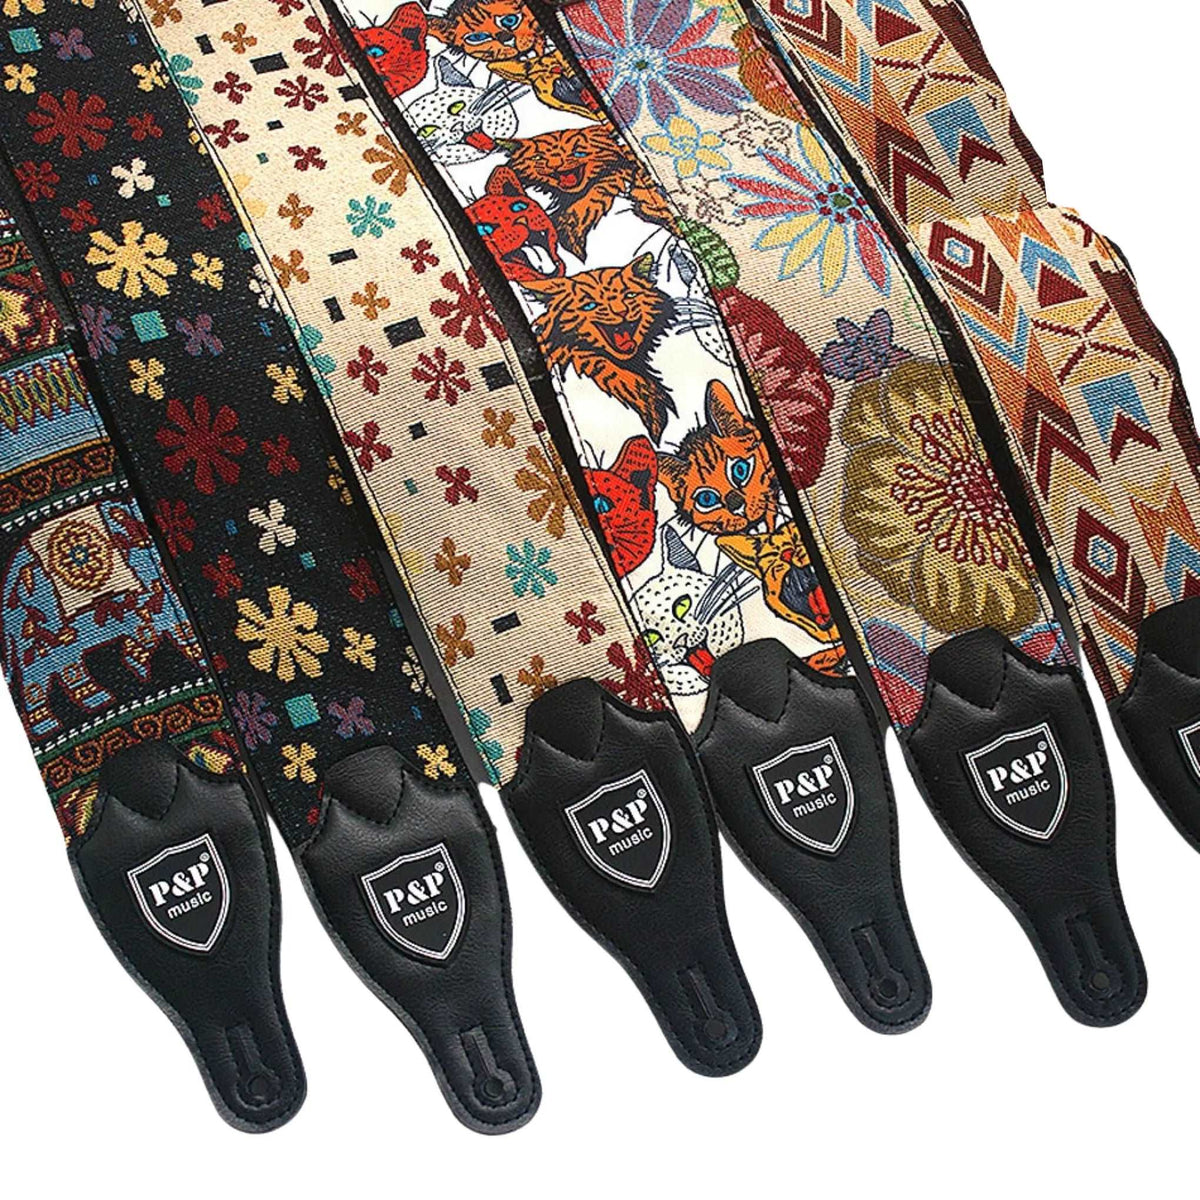 How to Pick the Right Cool Guitar Straps for You - StrapGraphics